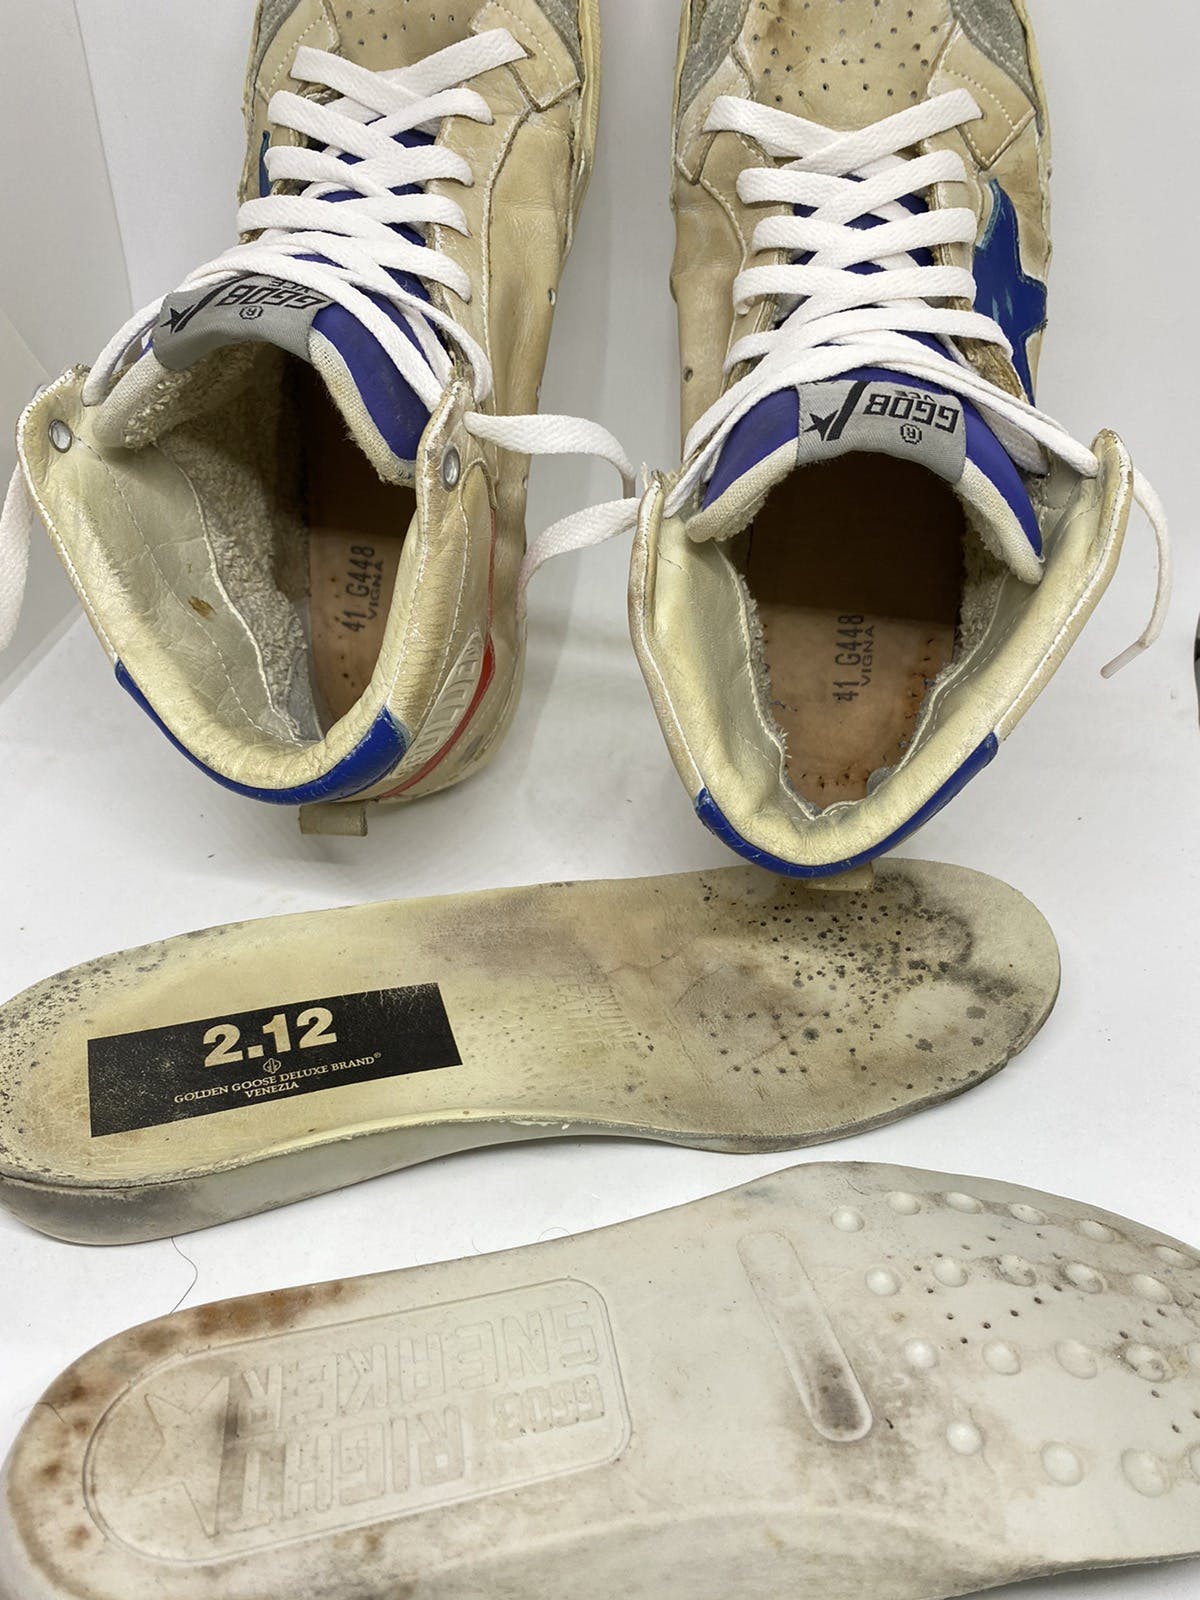 GOLDEN GOOSE vce 2.12 ggdb Sneakers size 41 or us 11 - 13